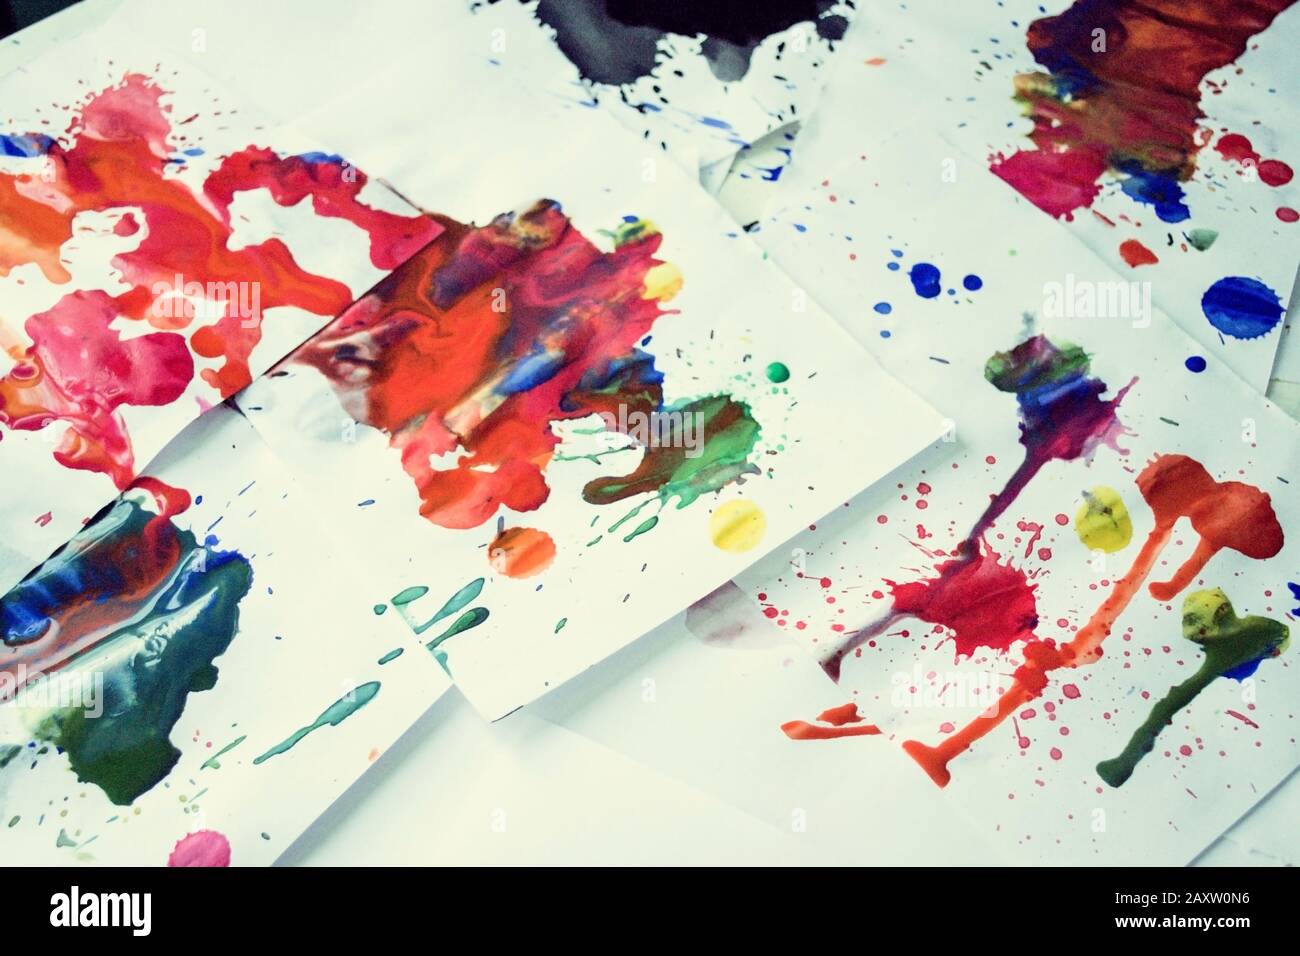 Many red colored blots on white paper with streaks. Abstract creative spots of paint on a white background. Red bright colors. Stained-spattered table Stock Photo